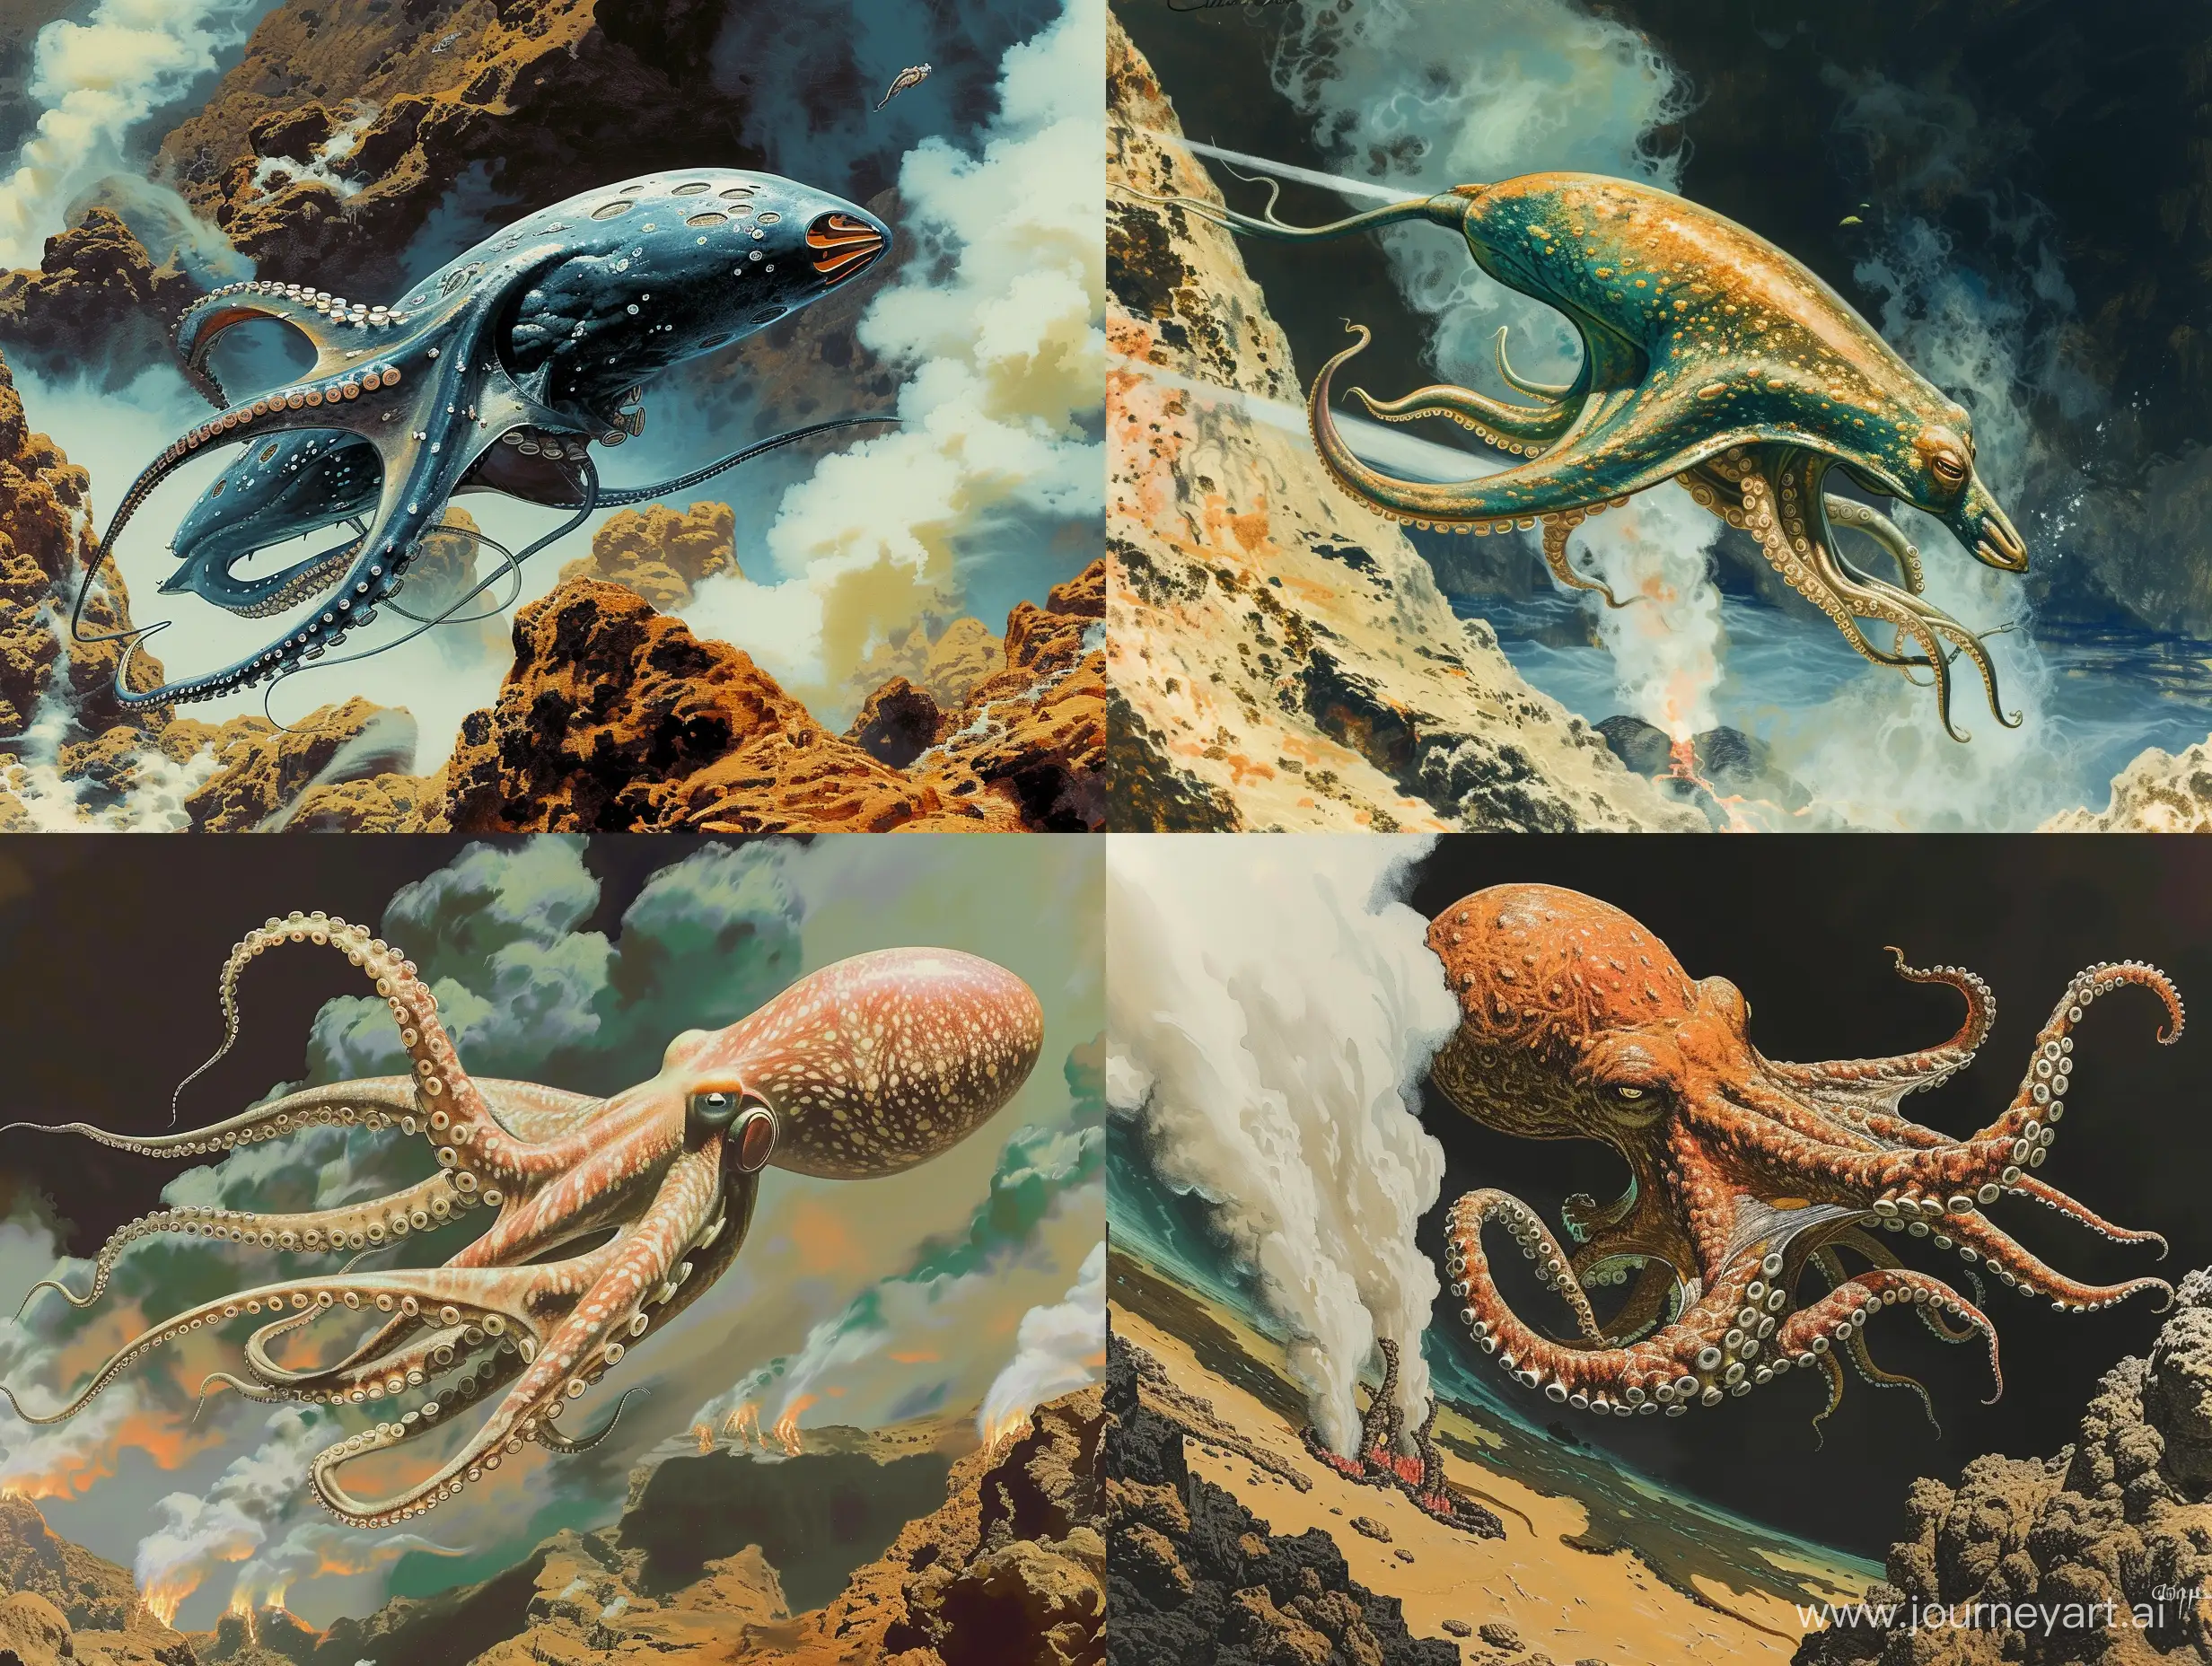 An alien hybrid of a cephalopod and cnidarian swimming in an ocean near smoking hydrothermal vents. In the style of Roger Dean and Ralph McQuarrie. retro science fiction art style. in color. surreal.